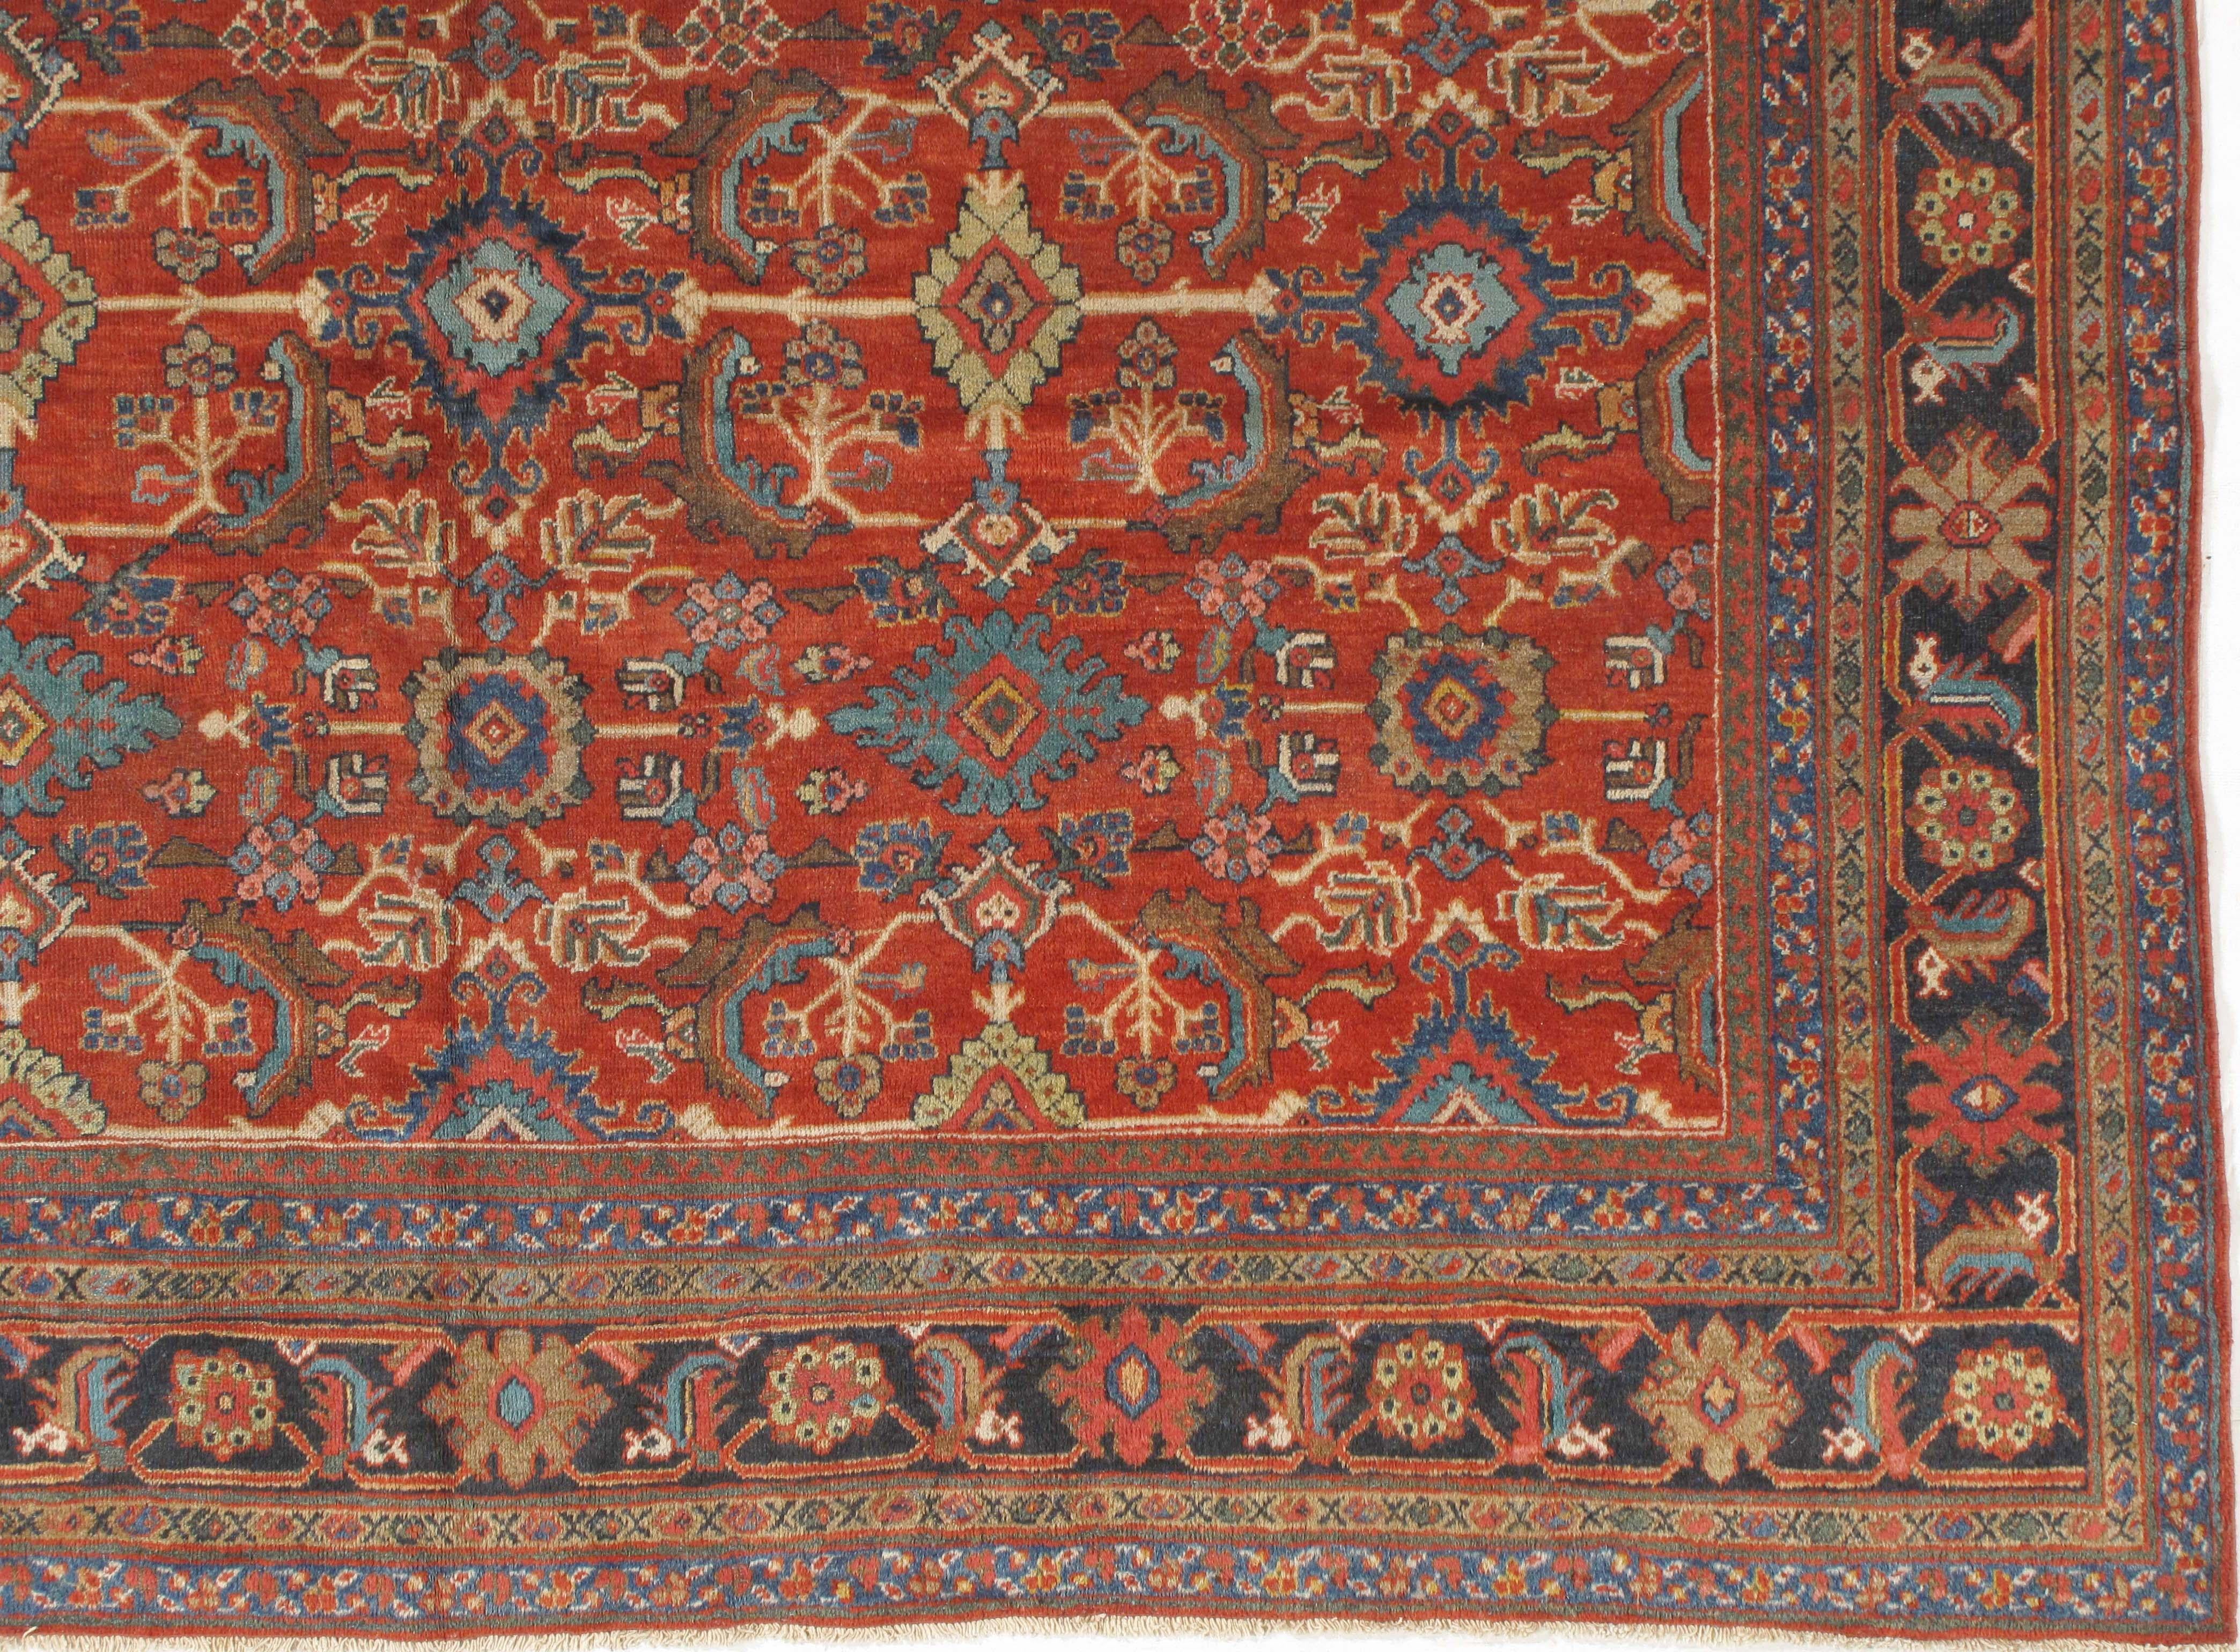 Hand-Woven Antique Mahal Sultanabad Carpet Rug  9'8 x 14'6 For Sale